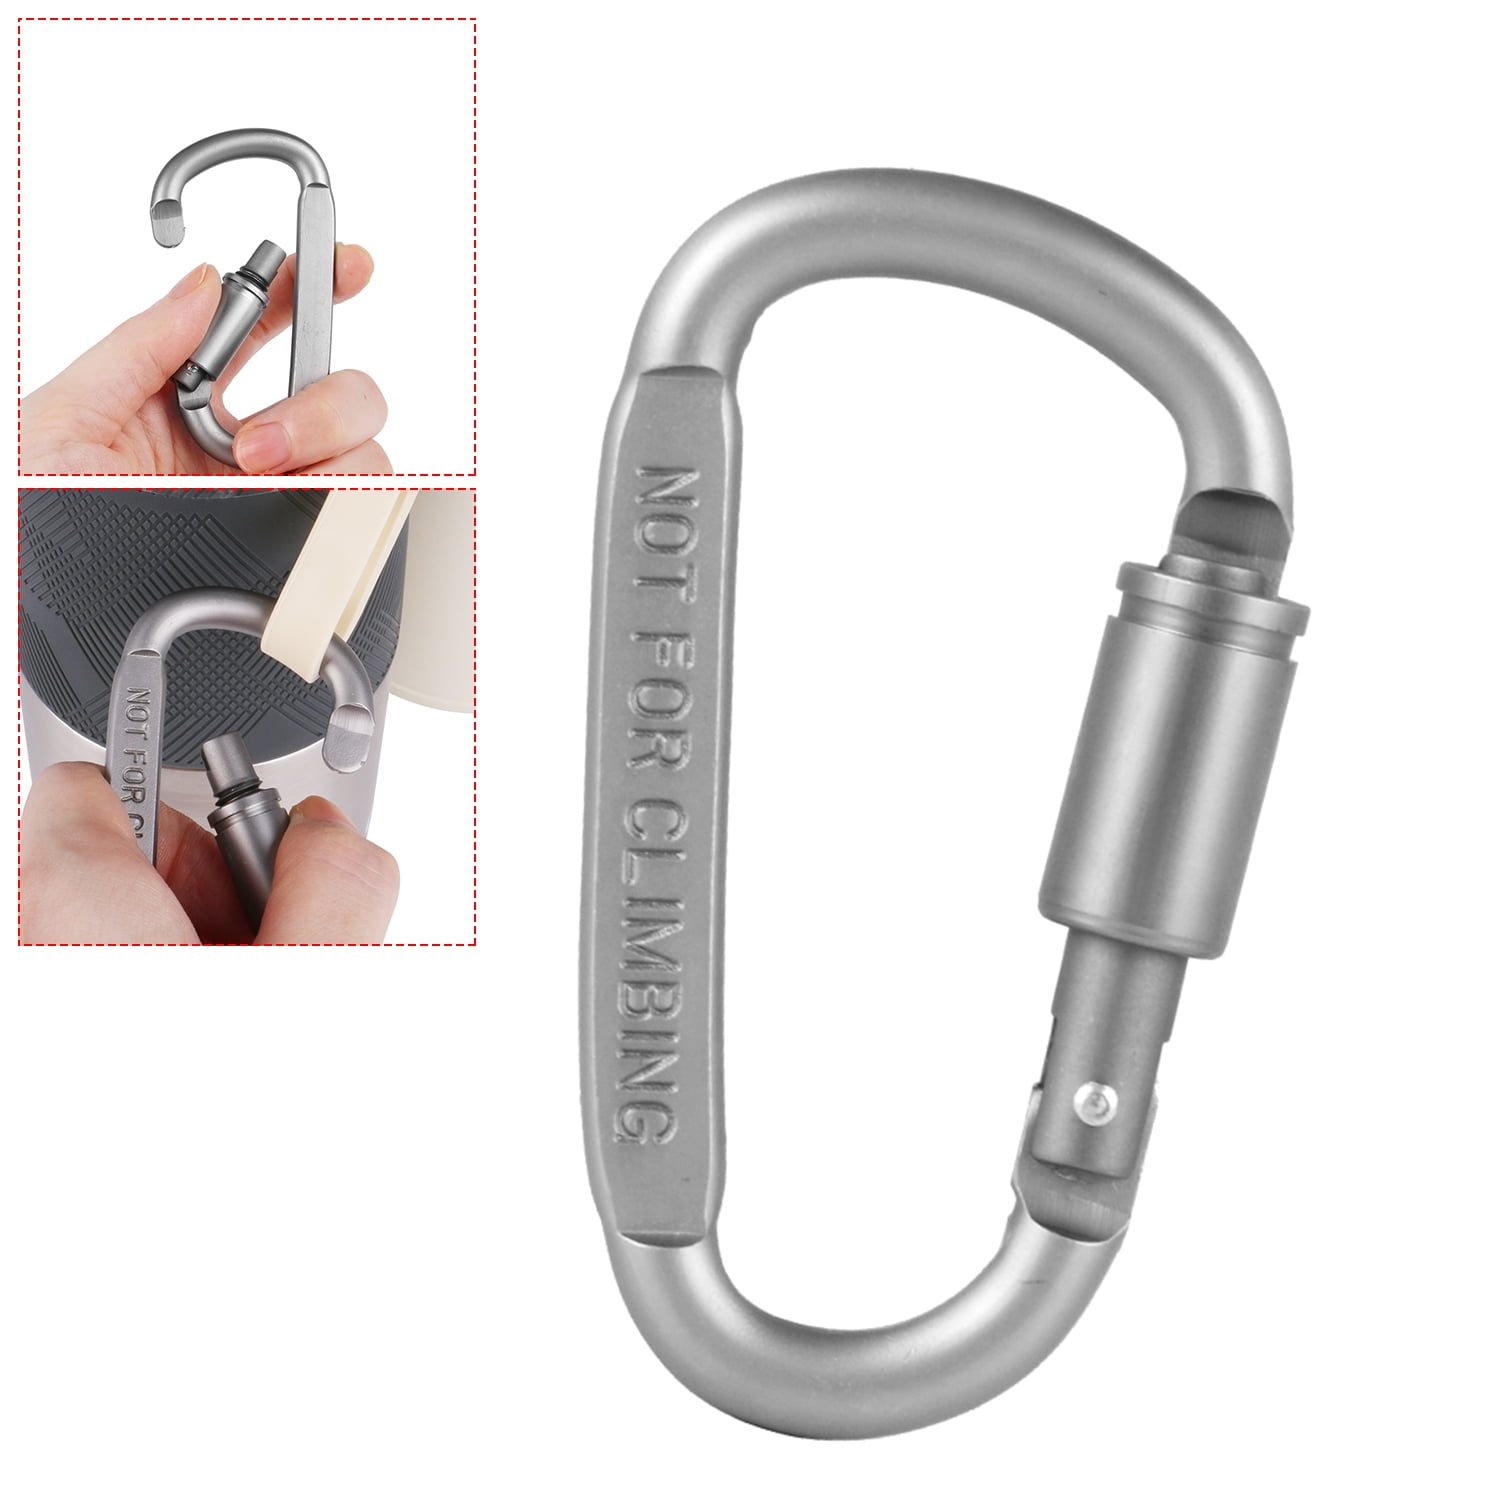 New Camping Outdoor Aluminum D-Ring Screw Locking Carabiner Hook Clip Key Chain 